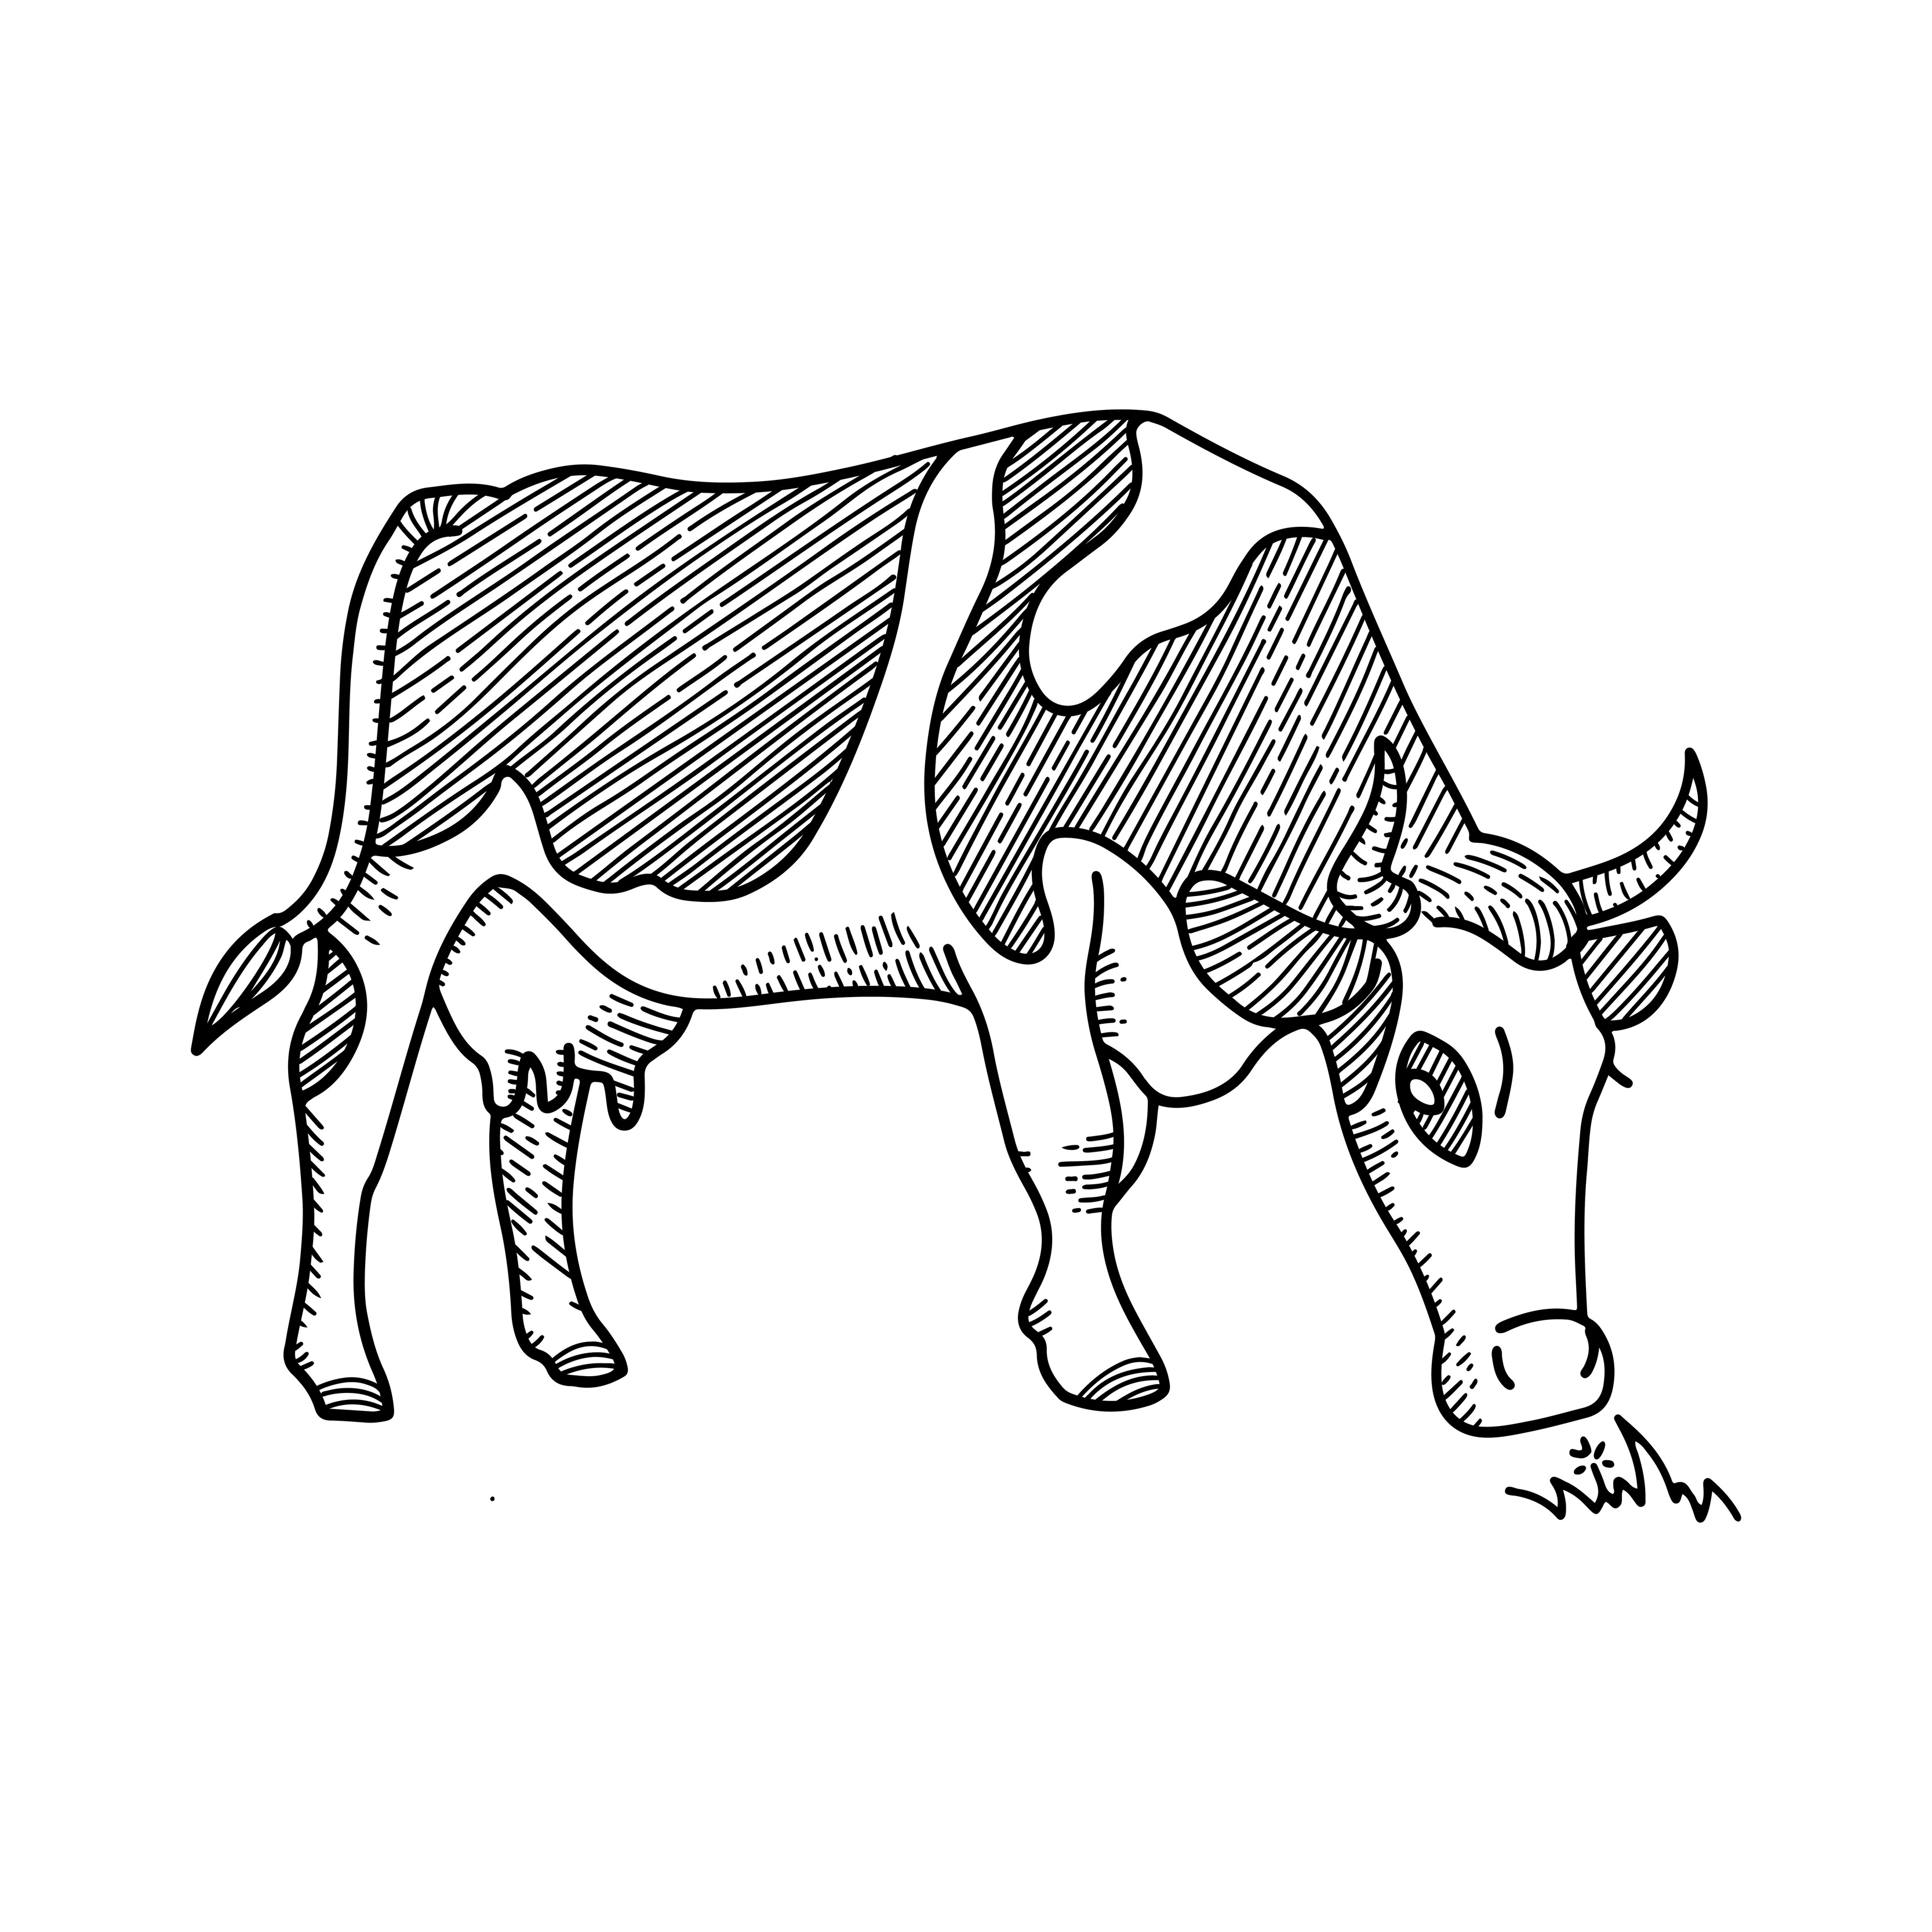 Hand Drawn Cow White Transparent, Black Hand Drawn Sketch Of Cow Elements,  Cow, Milk, Cattle PNG Image For Free Download